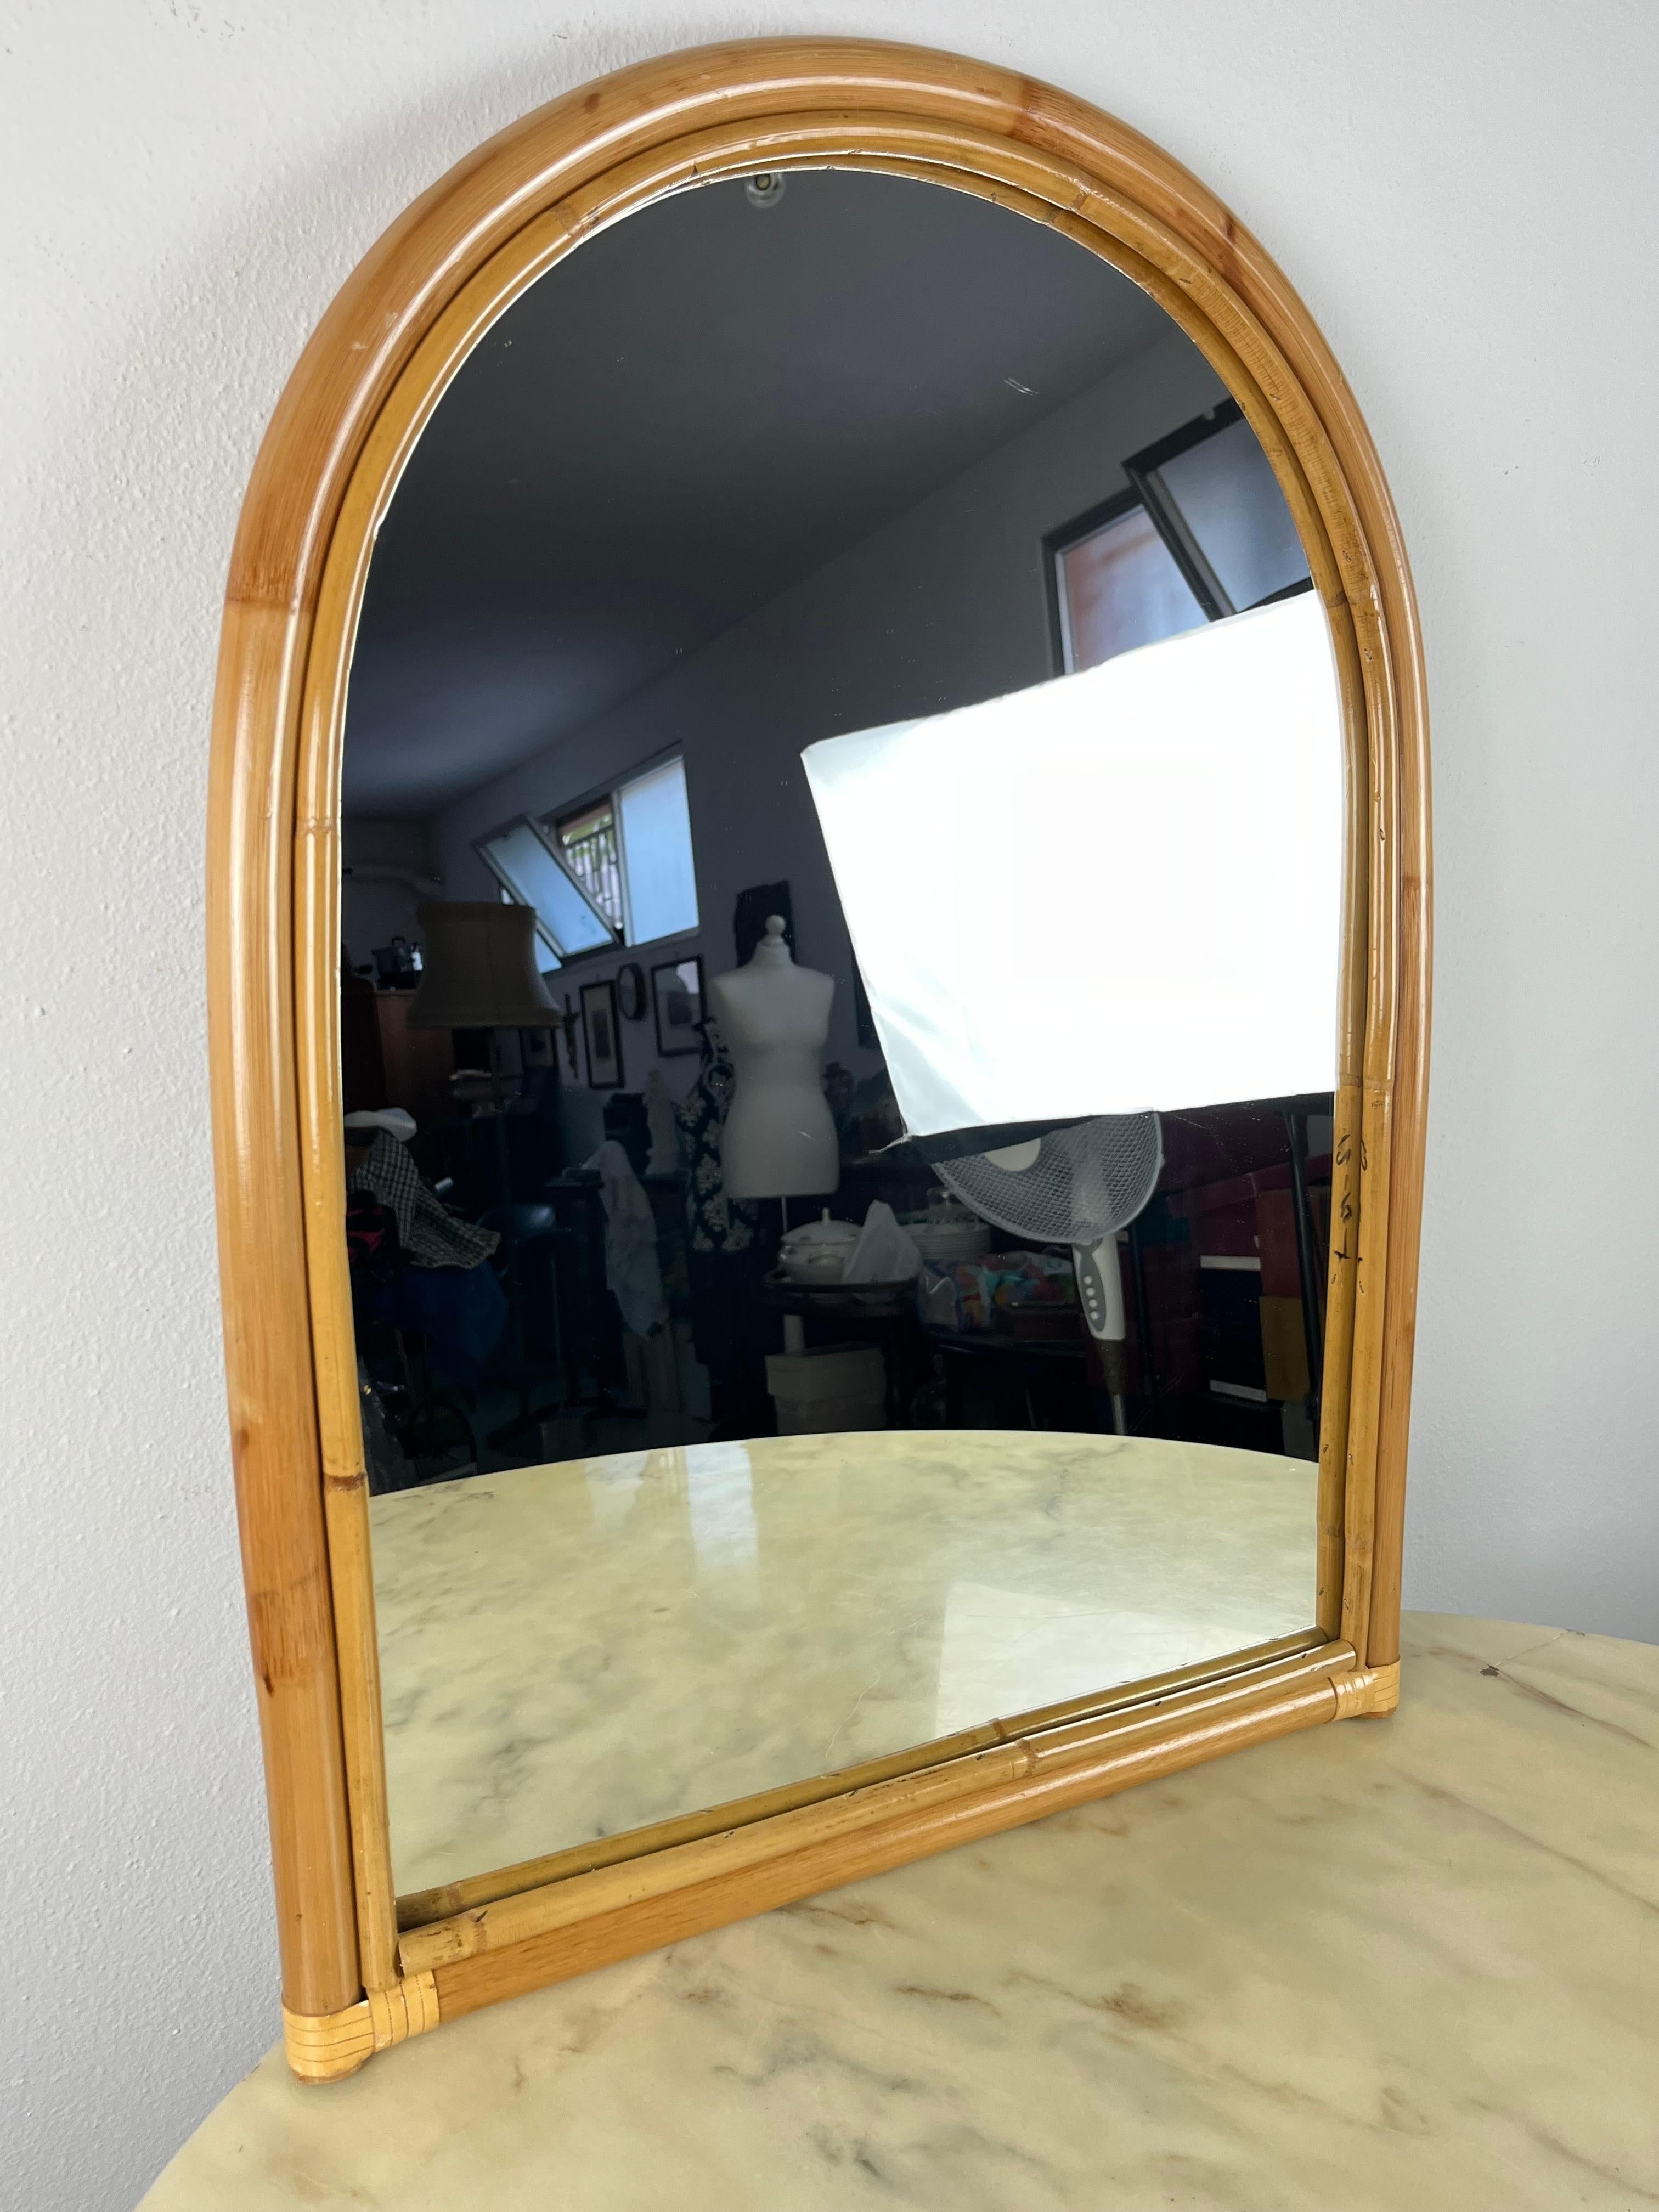 Vintage bamboo mirror, Italy, 1970s
Found in a villa in Taormina, a well-known Sicilian seaside resort.
It is in excellent condition, with small signs of aging.